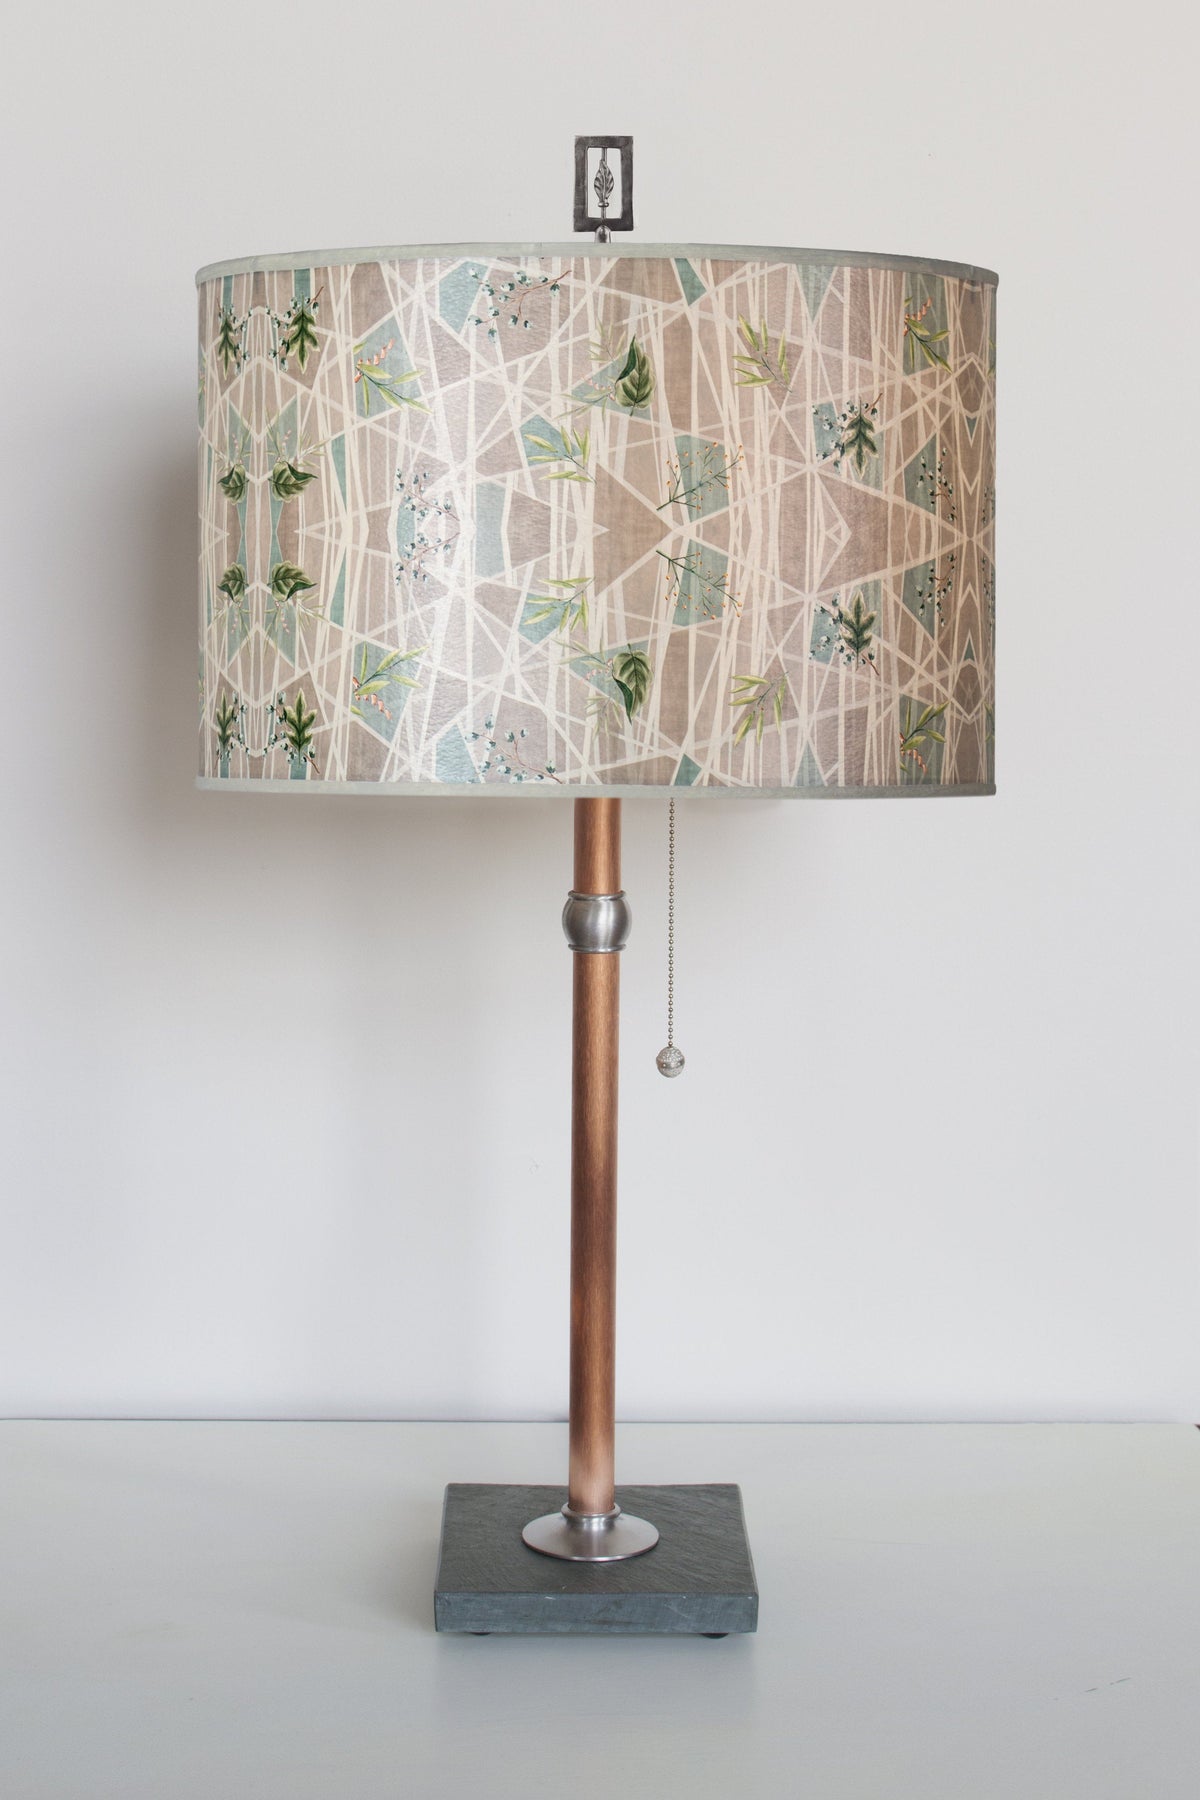 Copper Table Lamp with Large Drum Shade in Prism